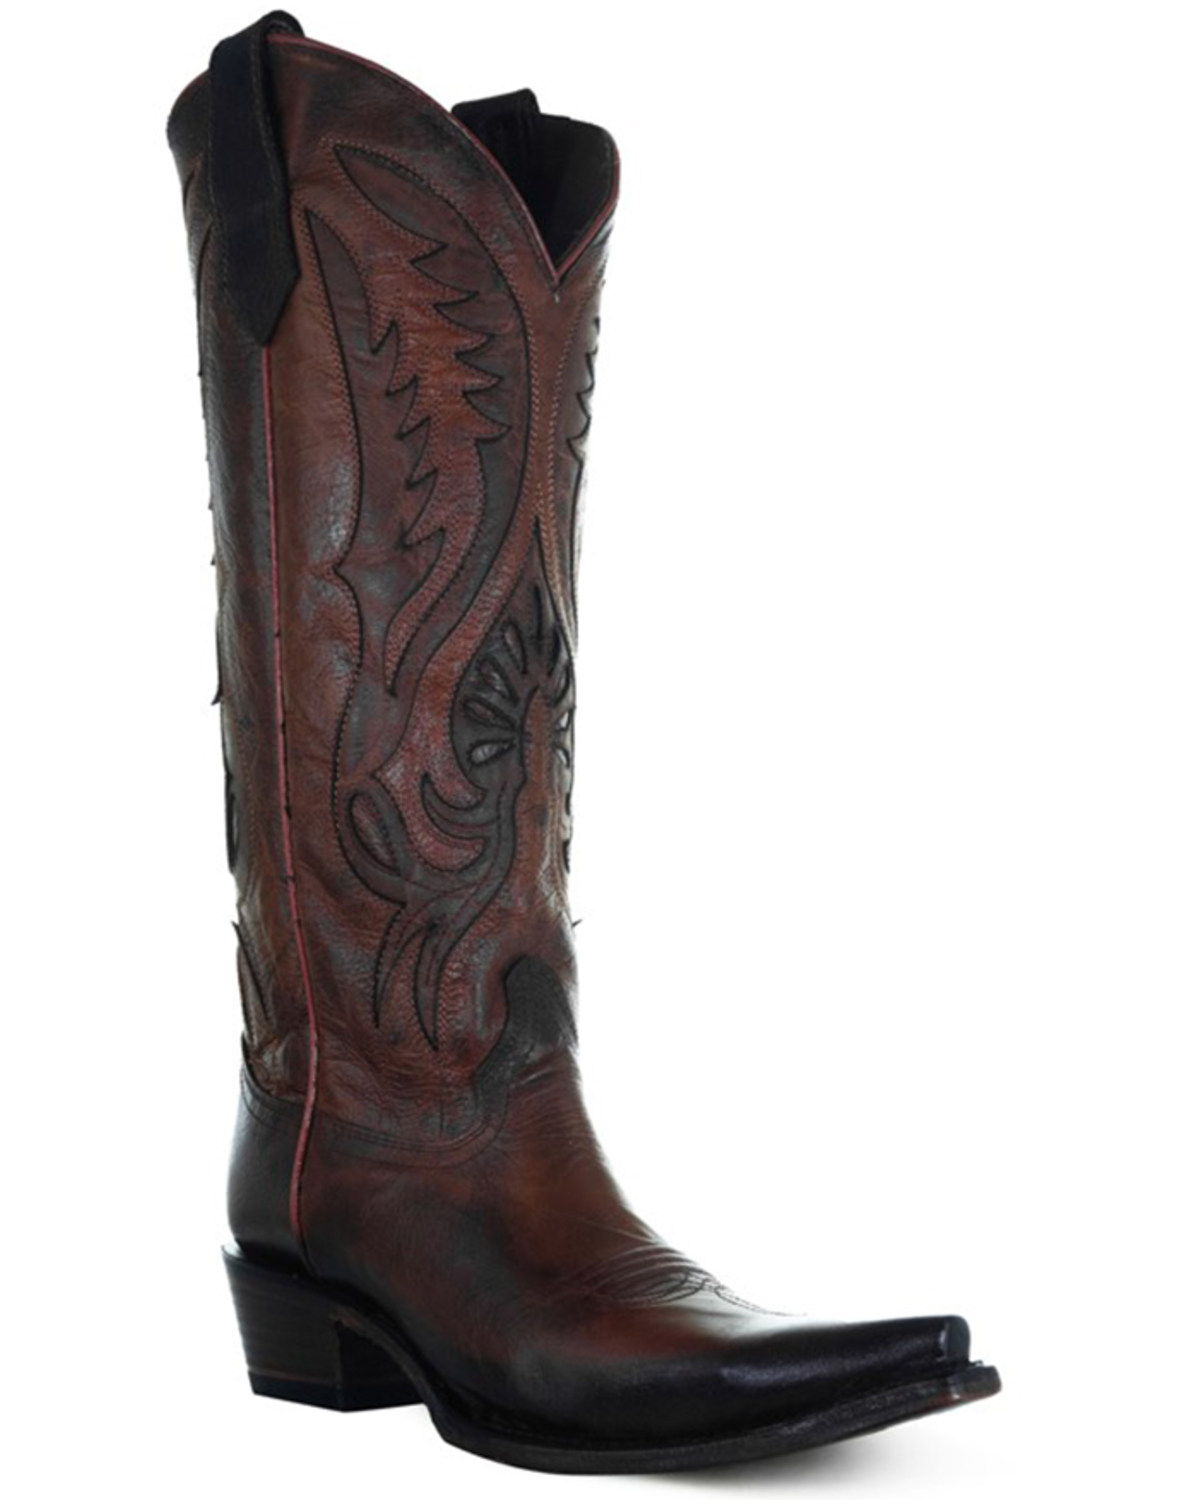 Corral Women's Inlay Tall Western Boots - Snip Toe